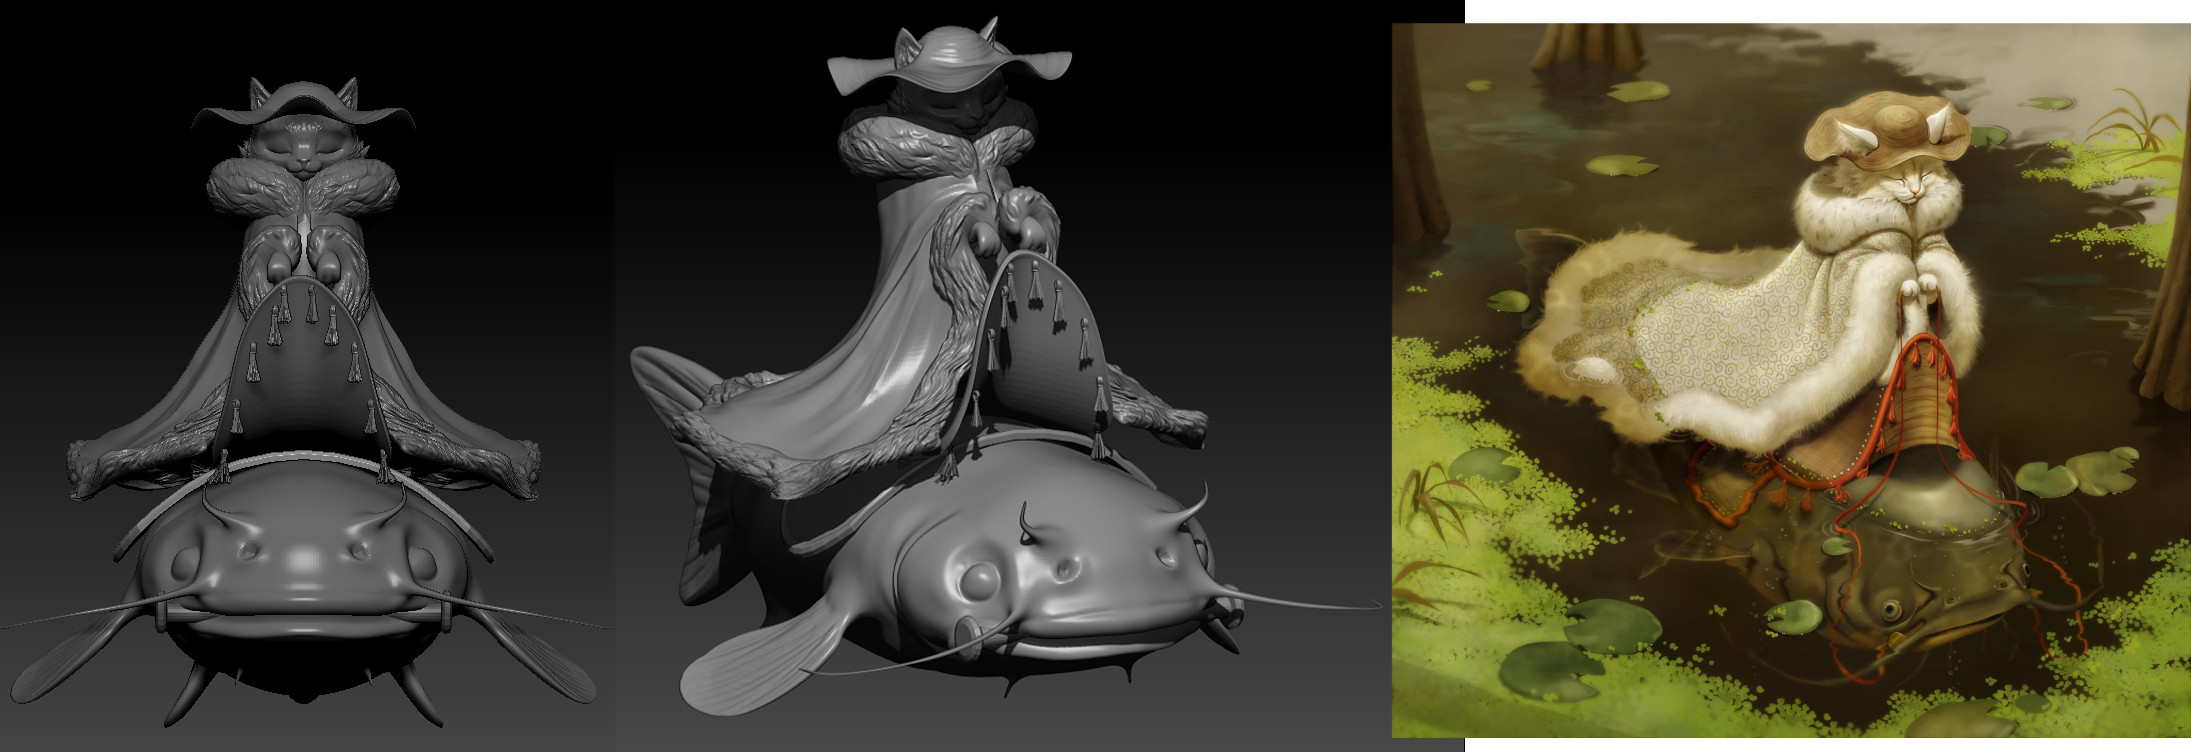 A better view of the mid-process sculpt next to the concept for reference.